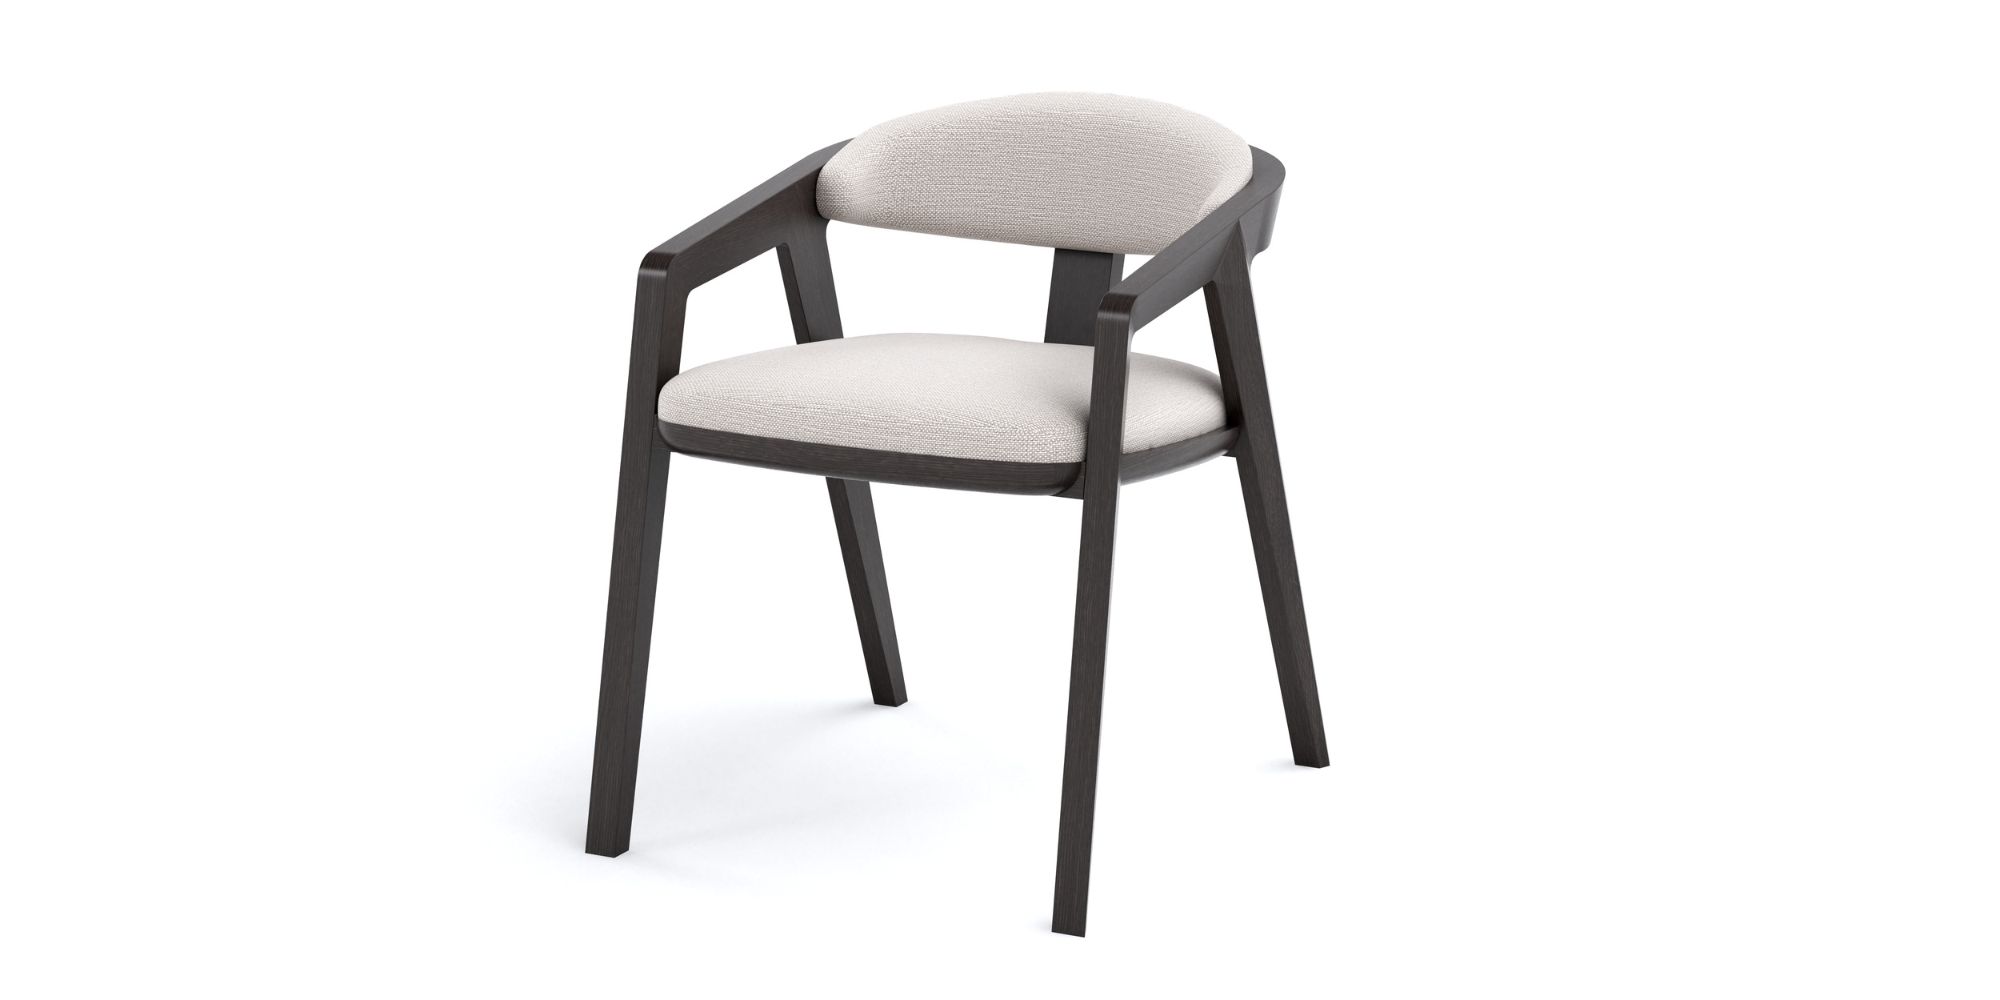 Largo Dining Chair – Cushion Back in Outdoor Dining Chairs for Largo collection